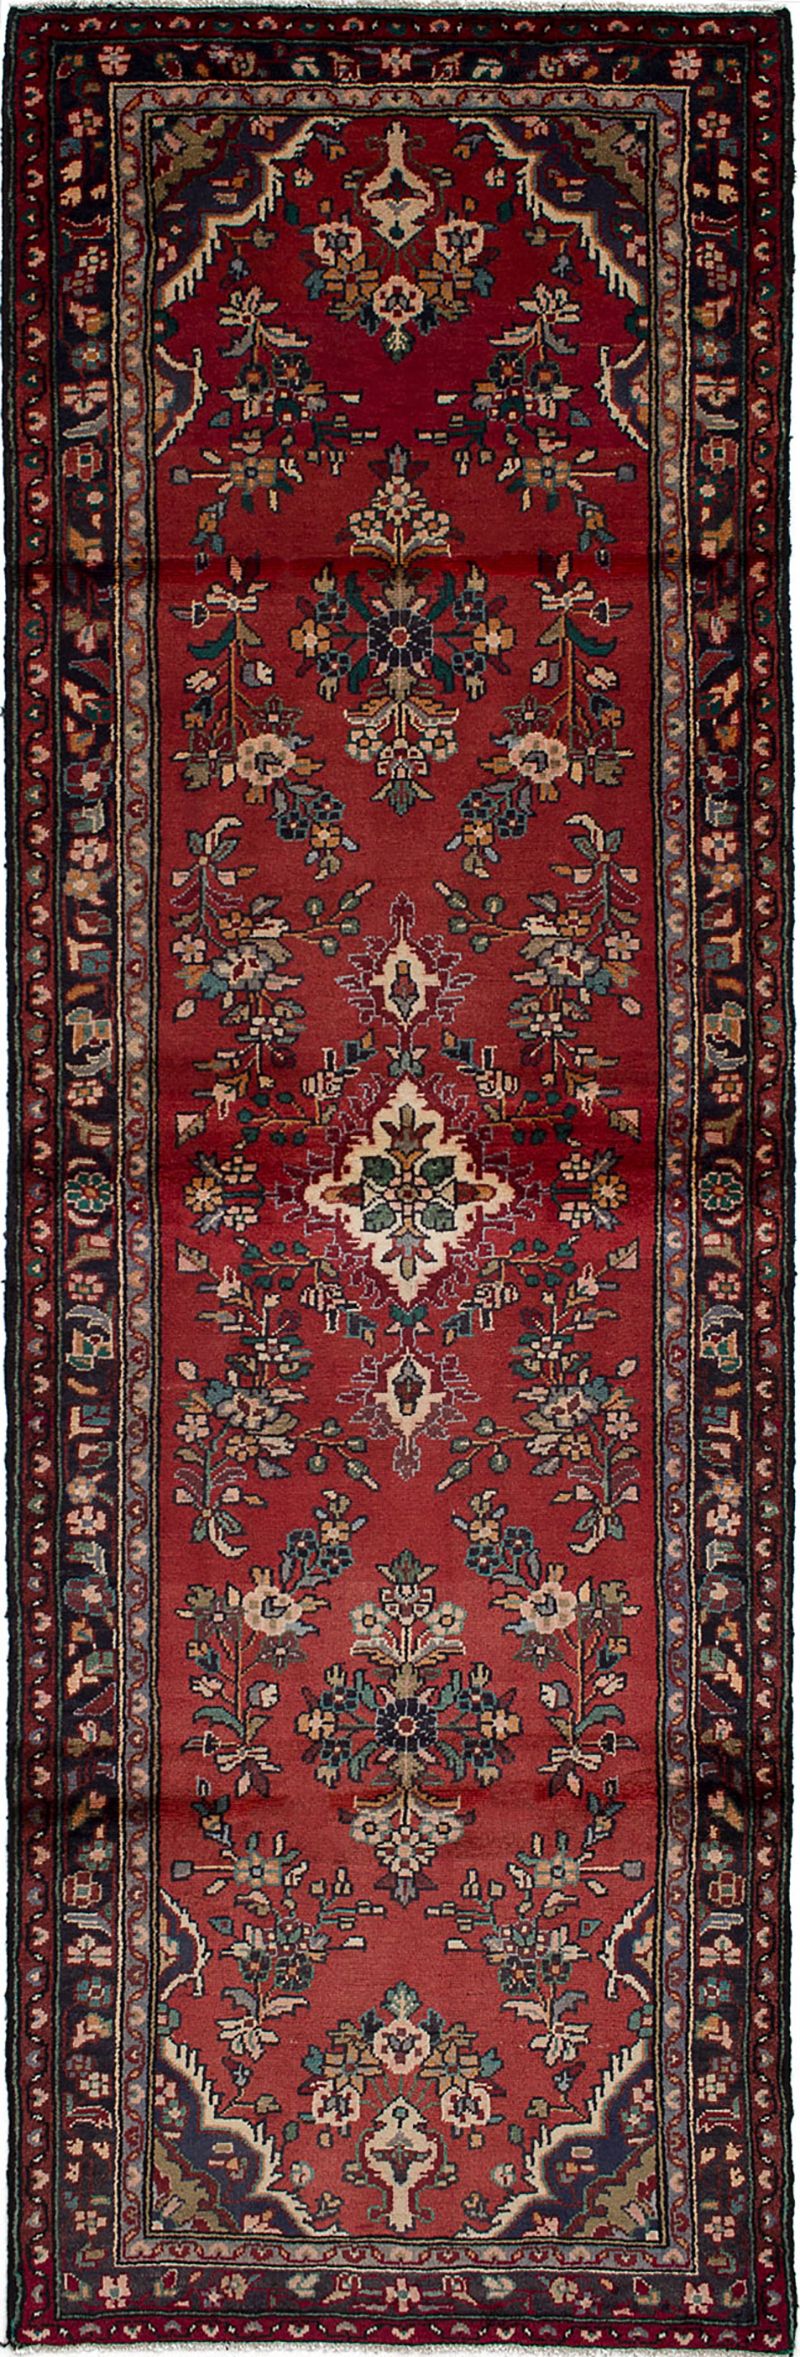 Hand-knotted Hamadan Red Wool Rug 3'2" x 9'10"  Size: 3'2" x 9'10"  